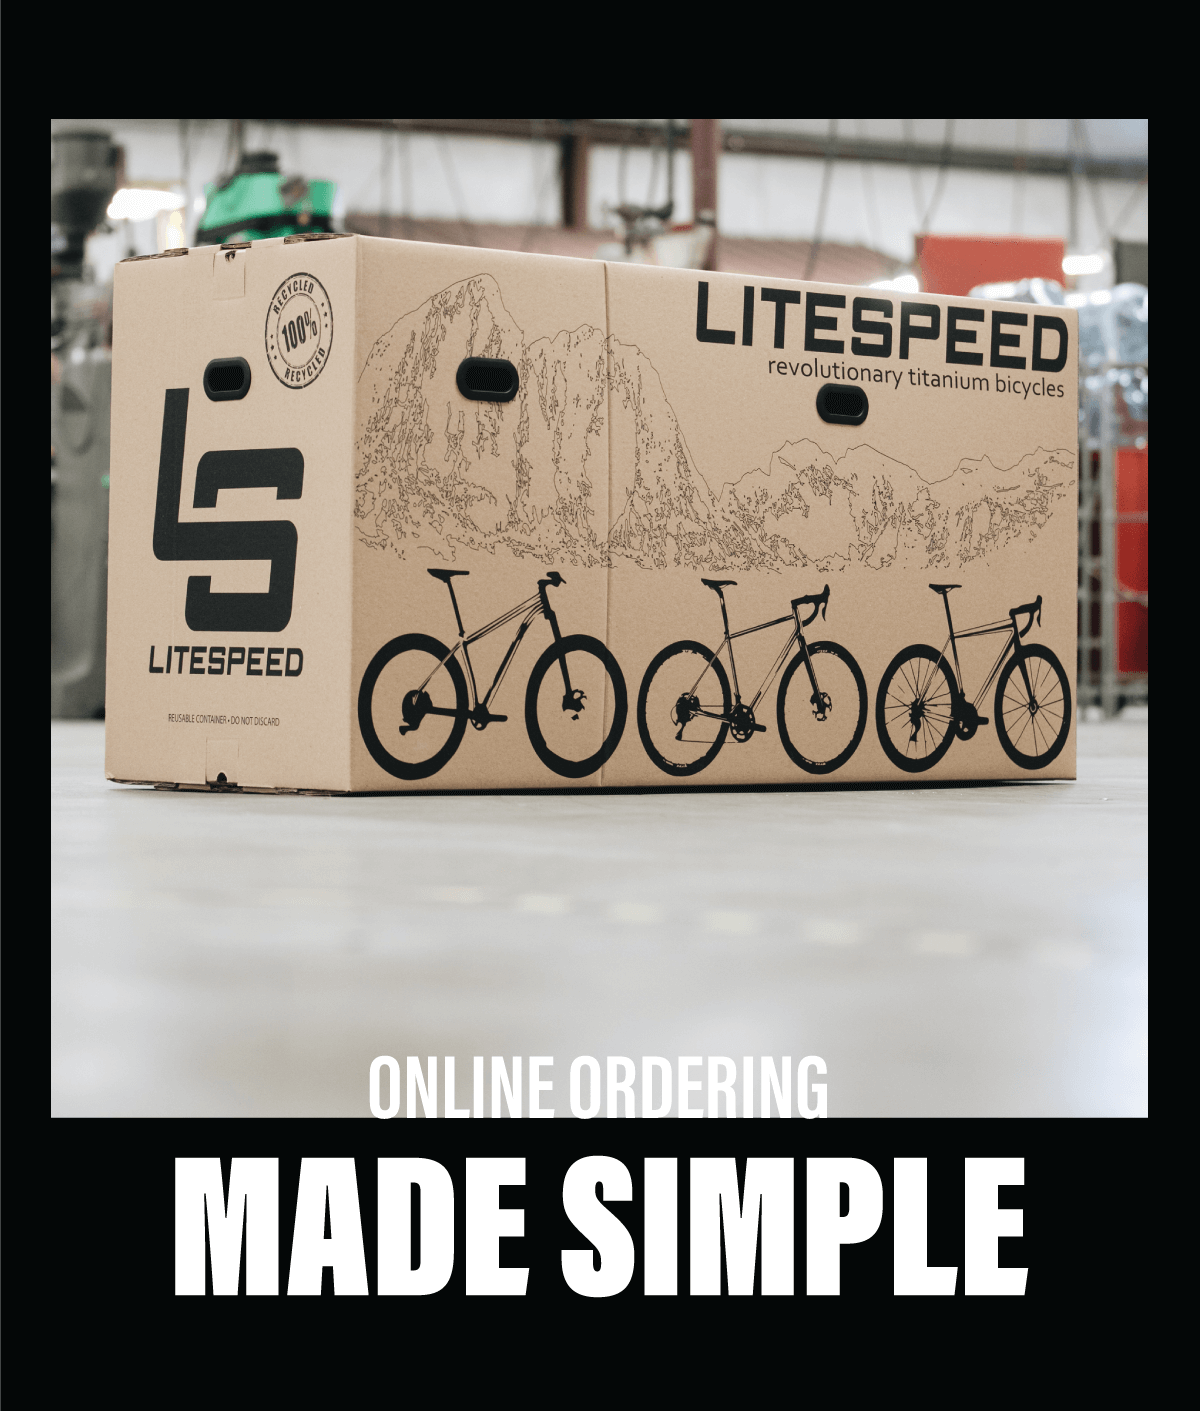 At your door, ready to ride. Order your Litespeed online and we''ll ship it to your door.